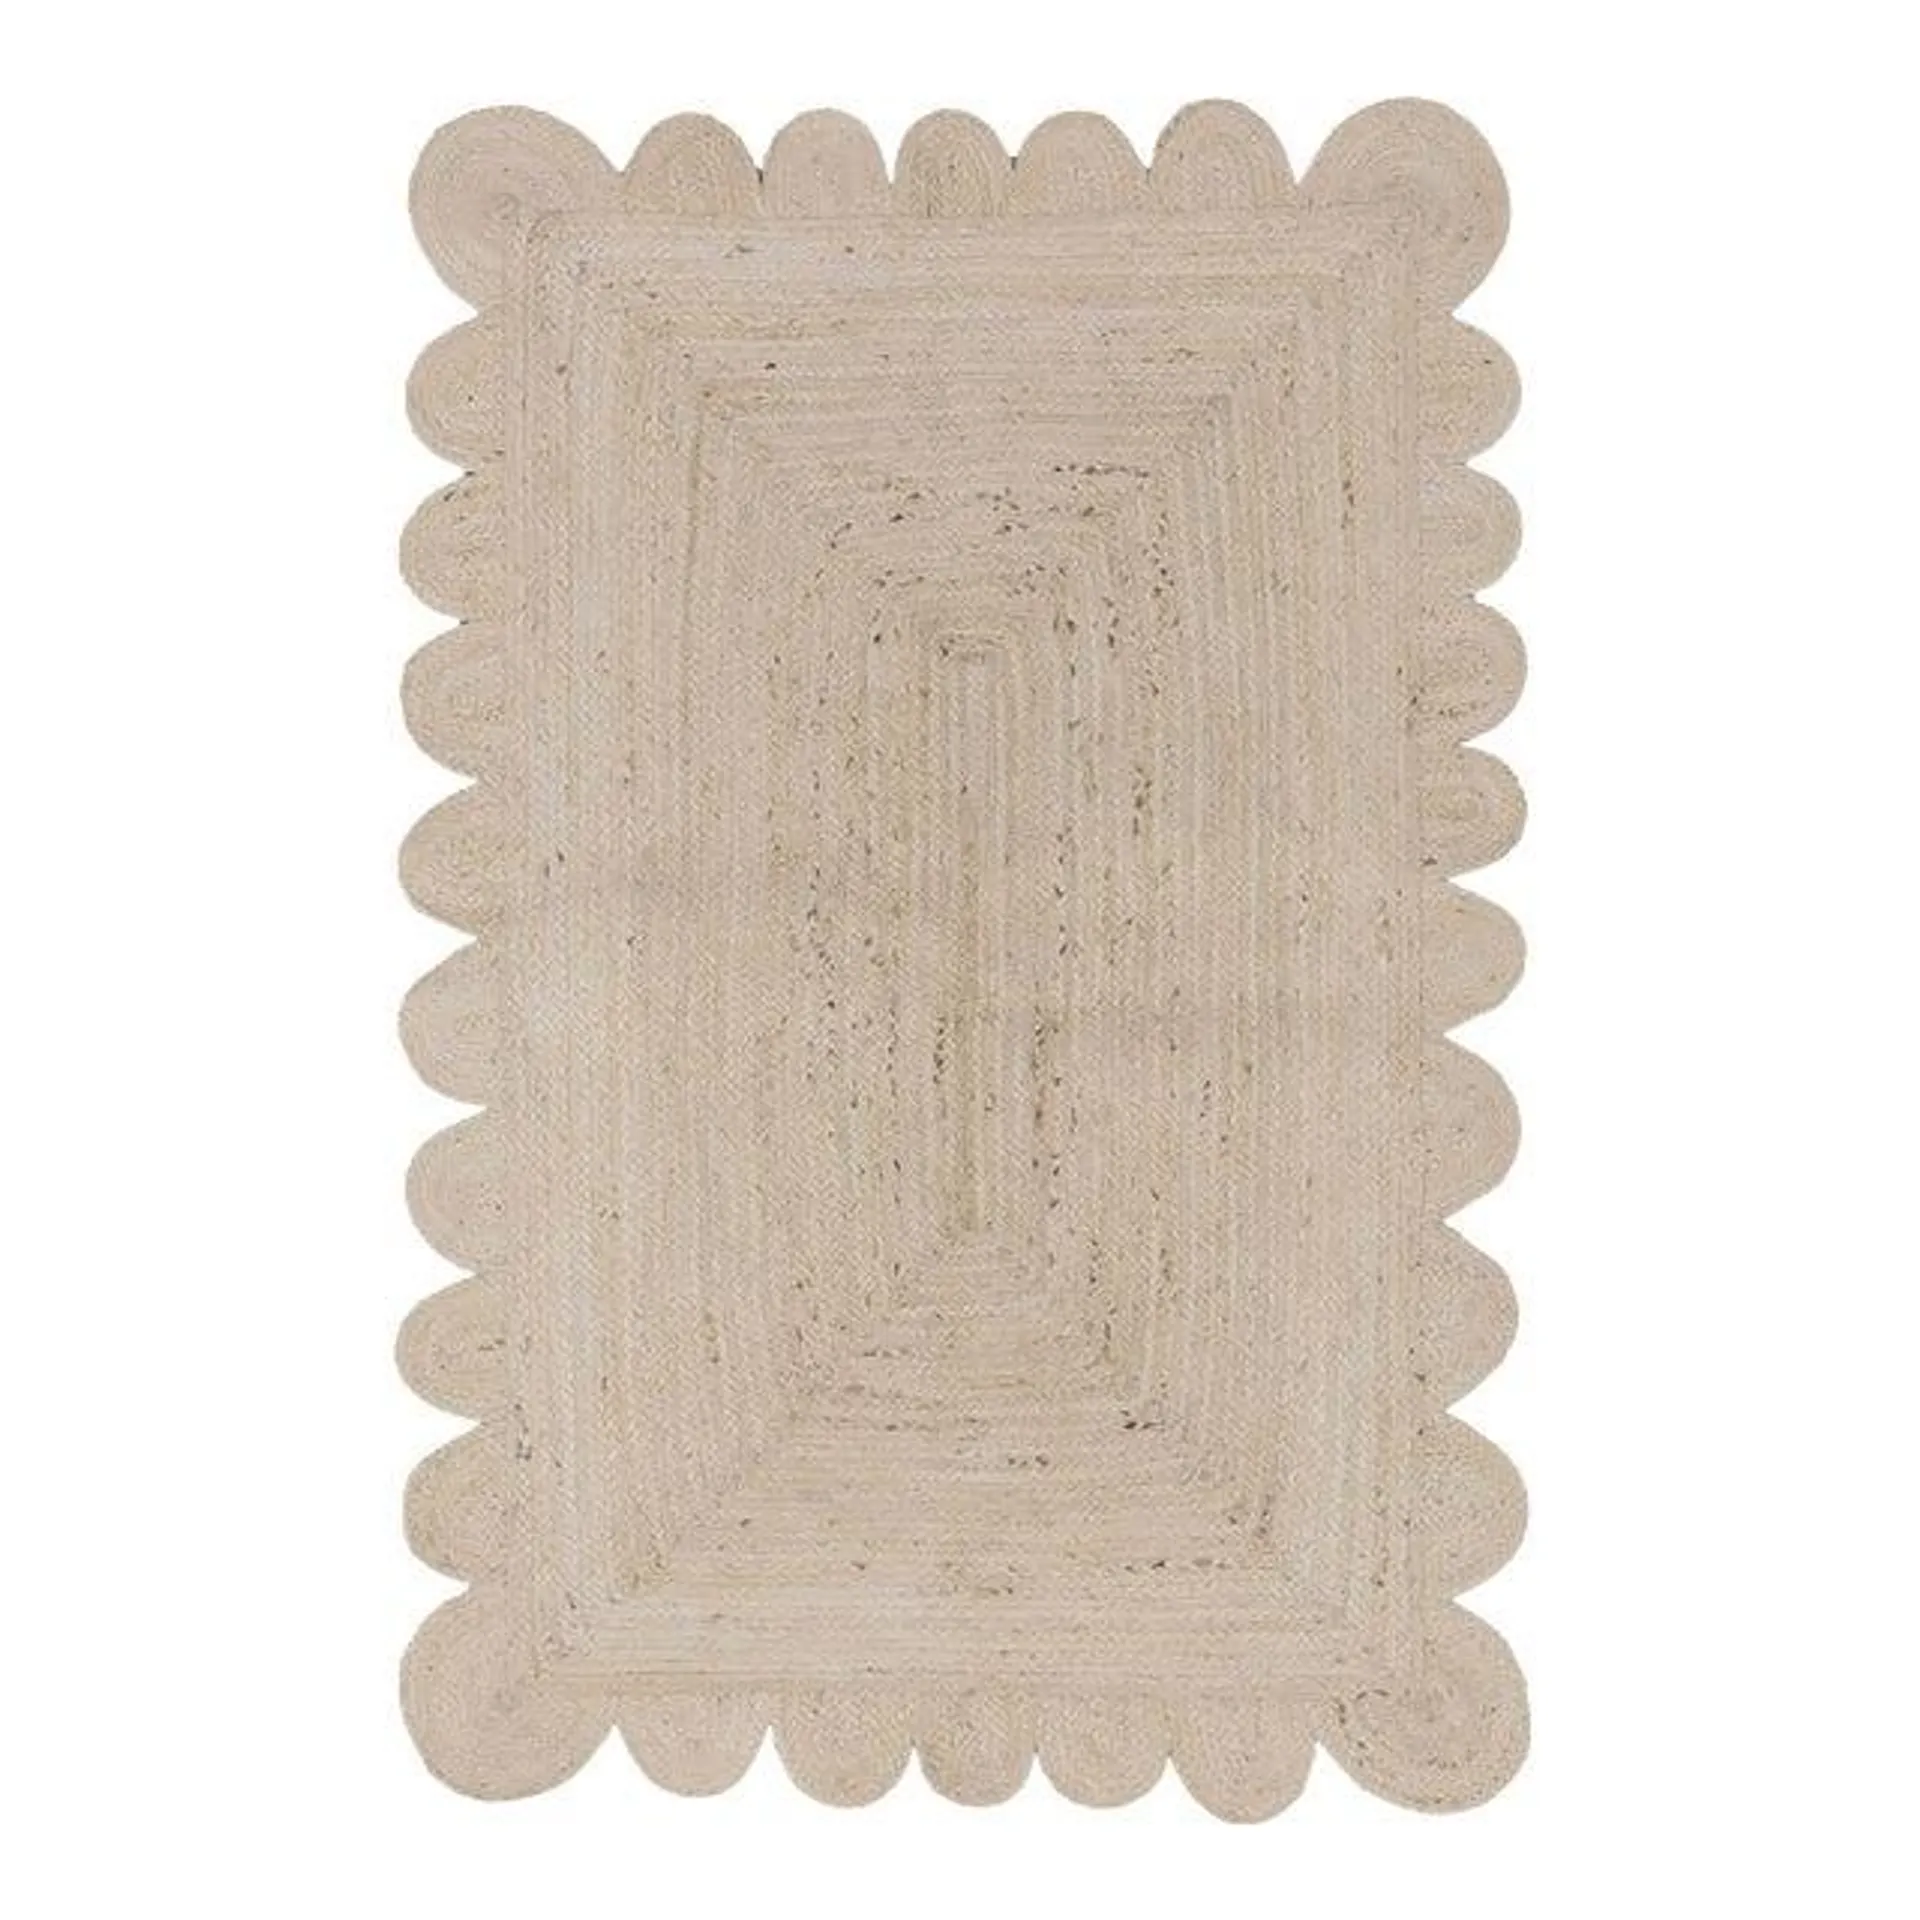 Natural White Jute Scallop Hand Made Rug - 8'x10'